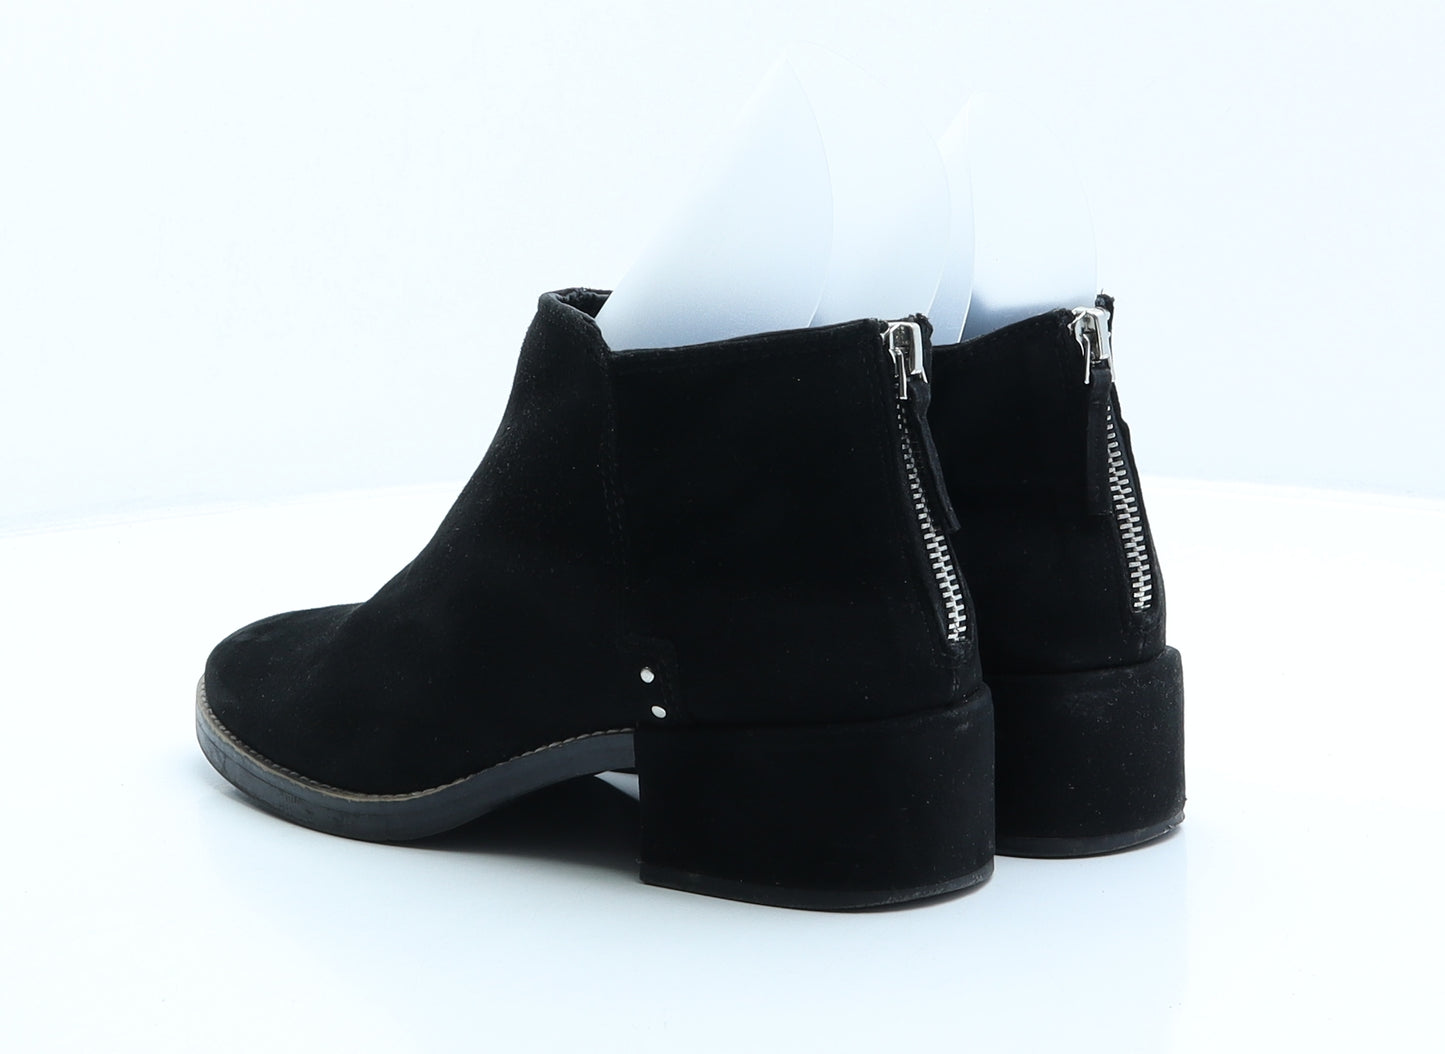 Pull&Bear Womens Black Polyester Bootie Boot UK 5.5 39